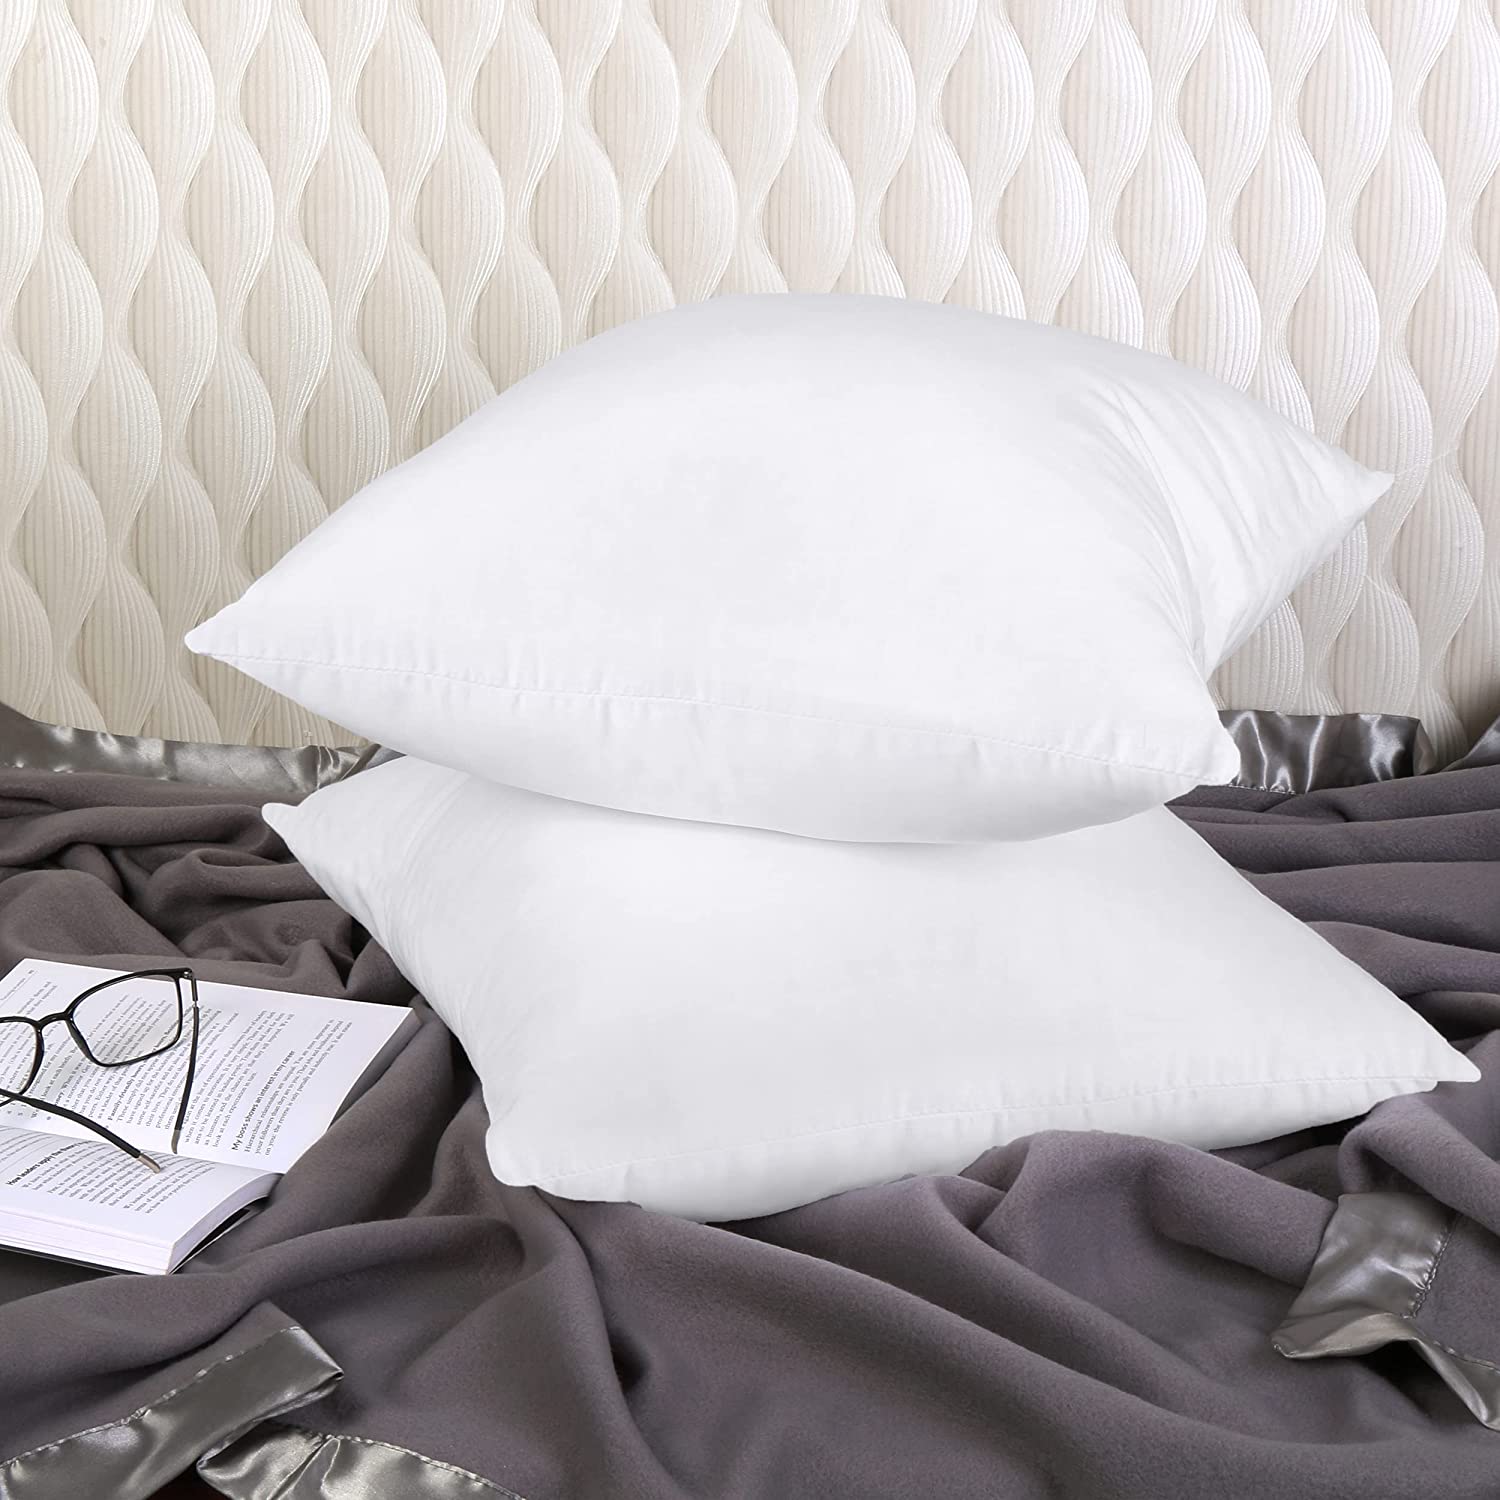 Utopia Bedding Throw Pillows Insert (Pack of 2, White) NIP - Lil Dusty  Online Auctions - All Estate Services, LLC